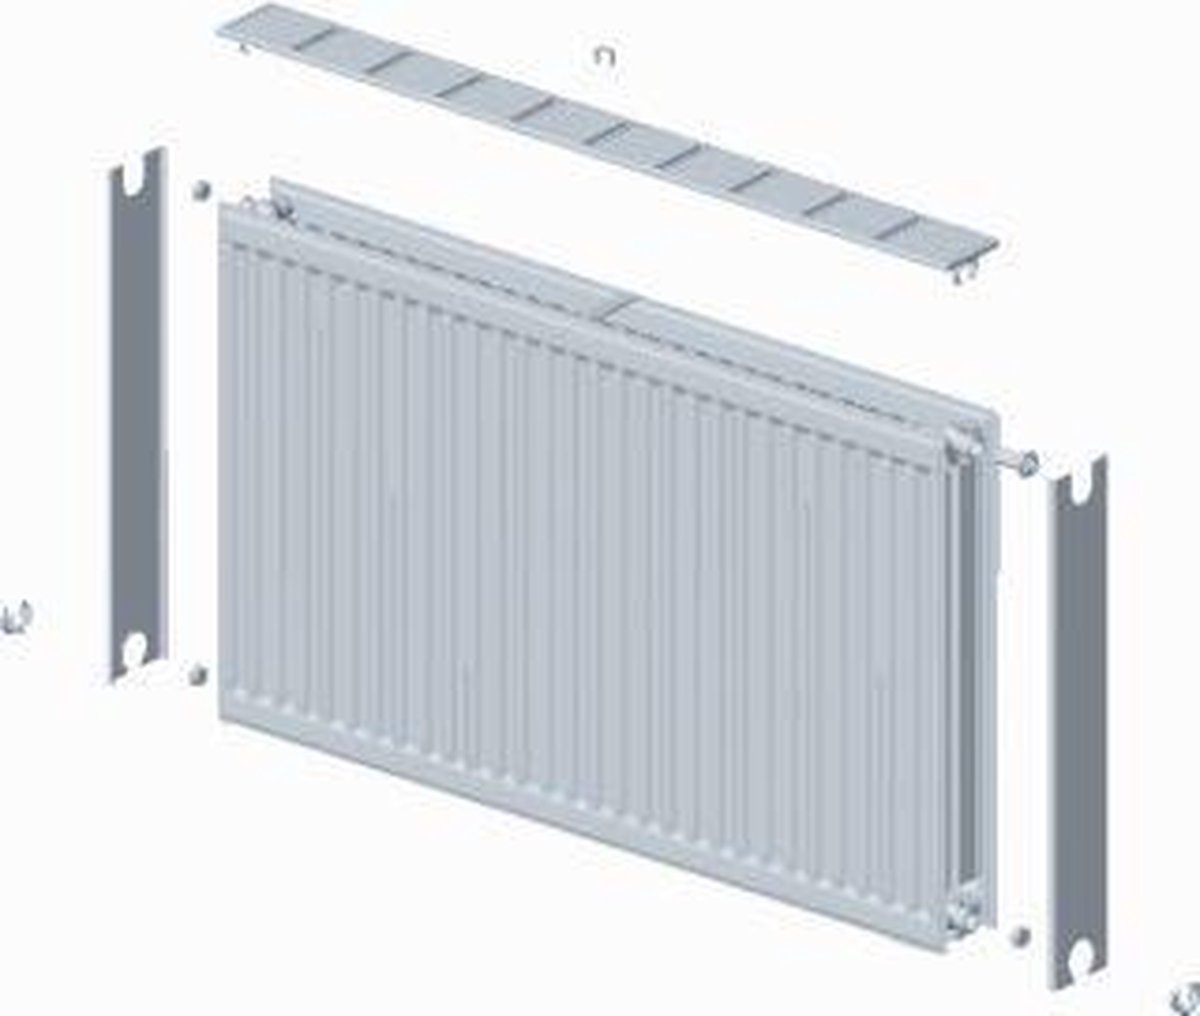 Stelrad paneelradiator Novello, staal, wit, (hxlxd) 500x2000x100mm, 22